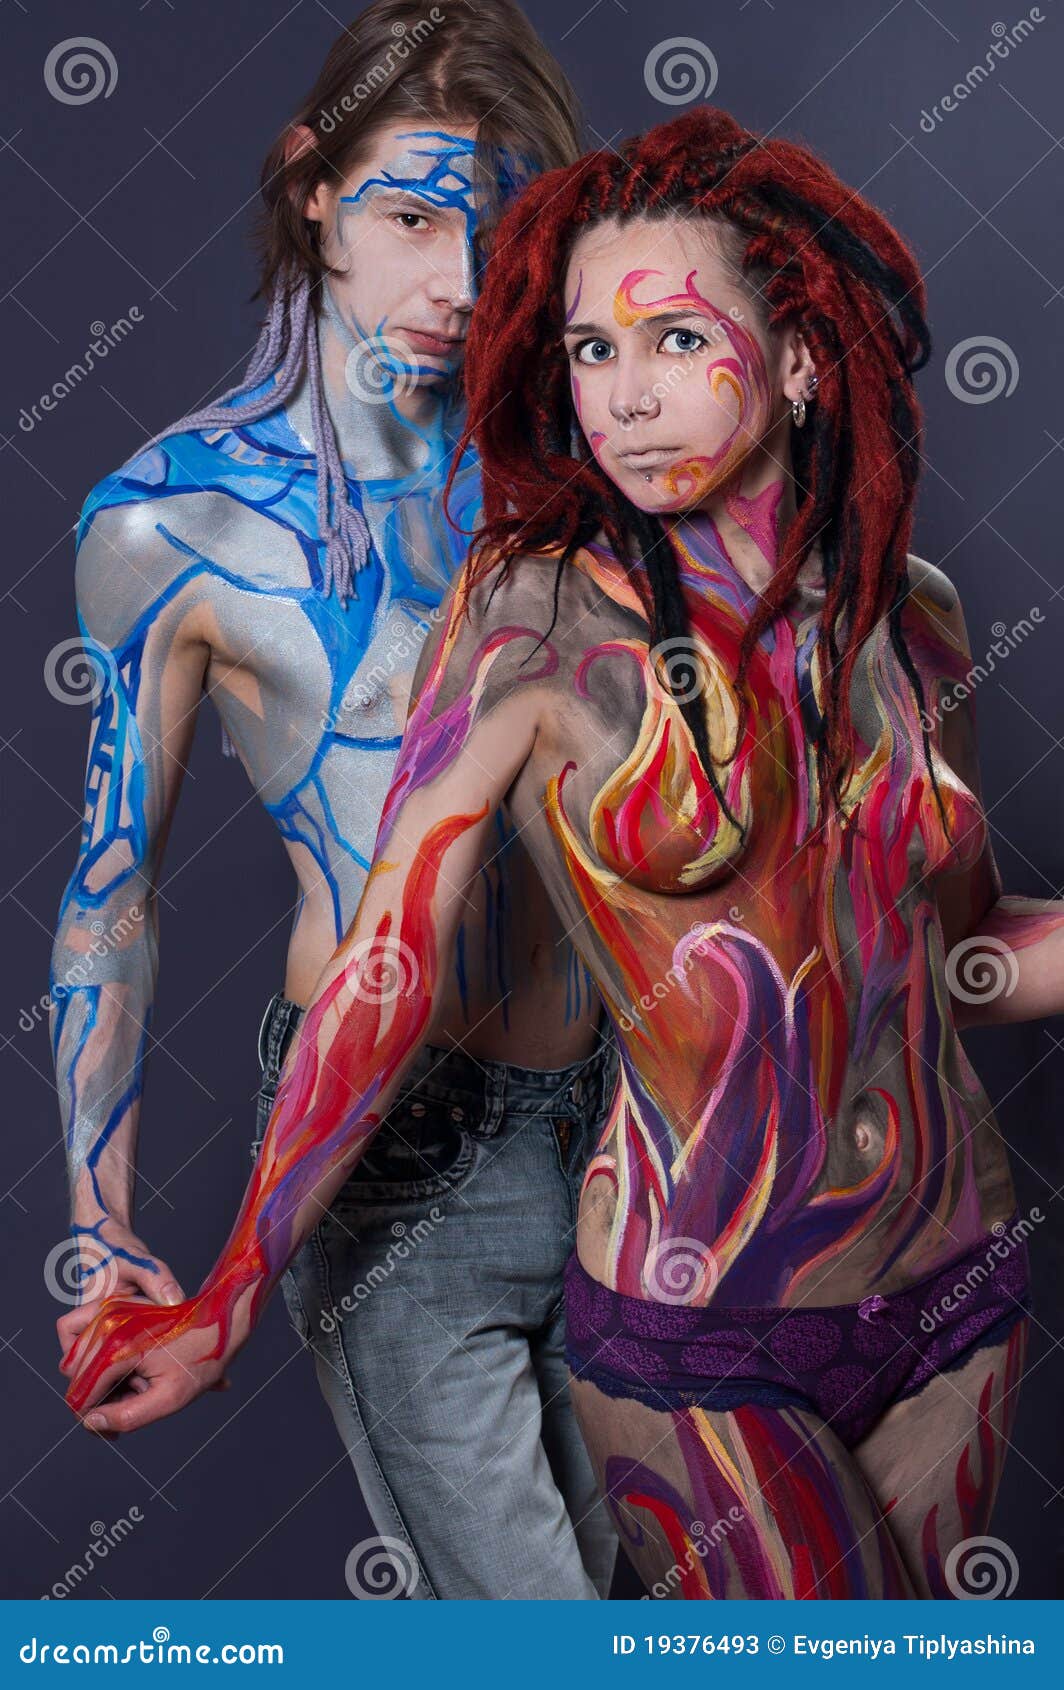 Best of Girl body painting image